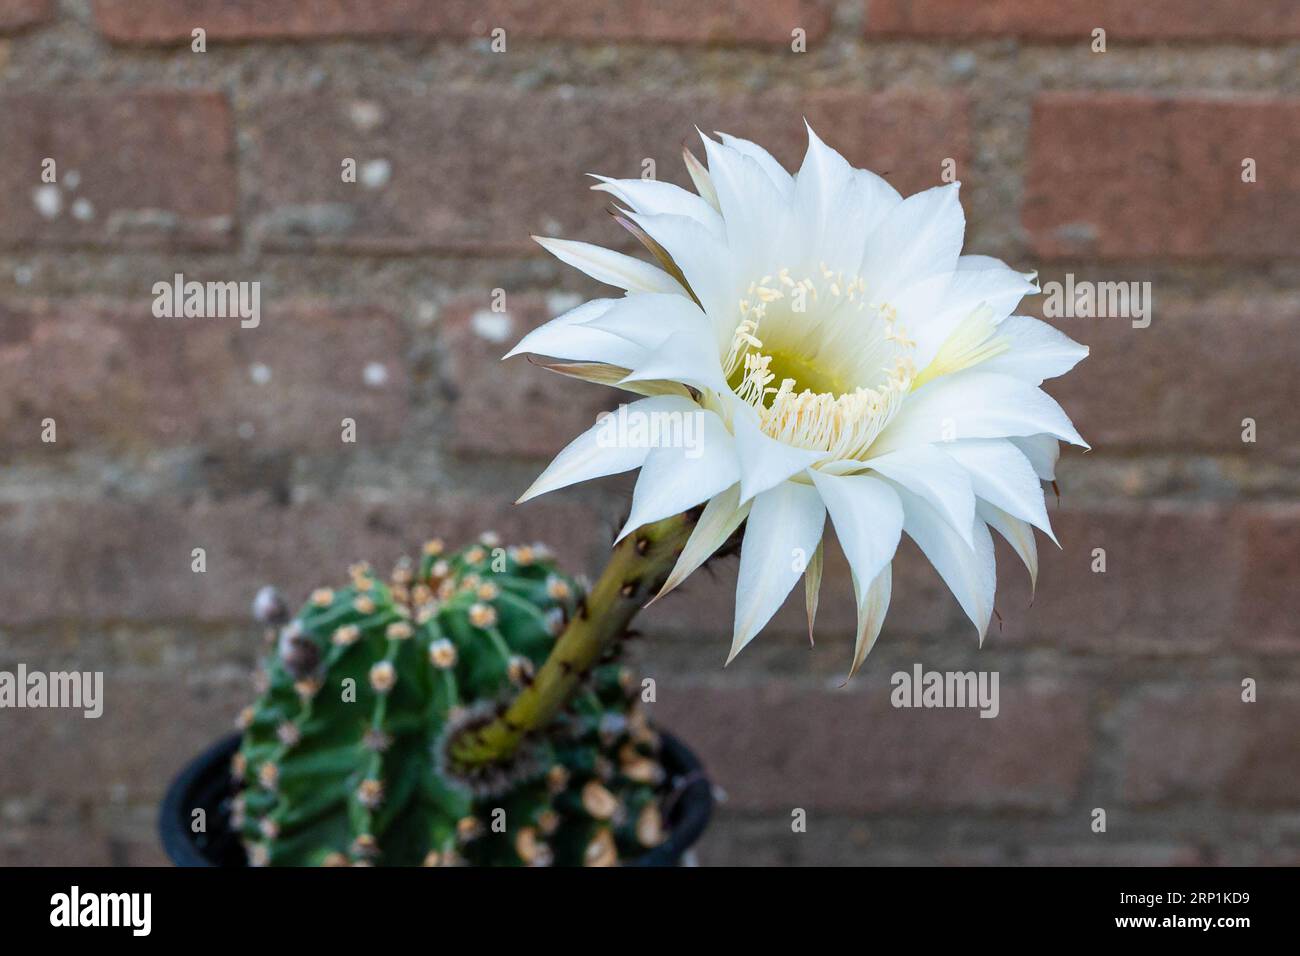 Vibrant white cactus flower of species Echinopsis subdenudata, blooms for only one day. Stock Photo